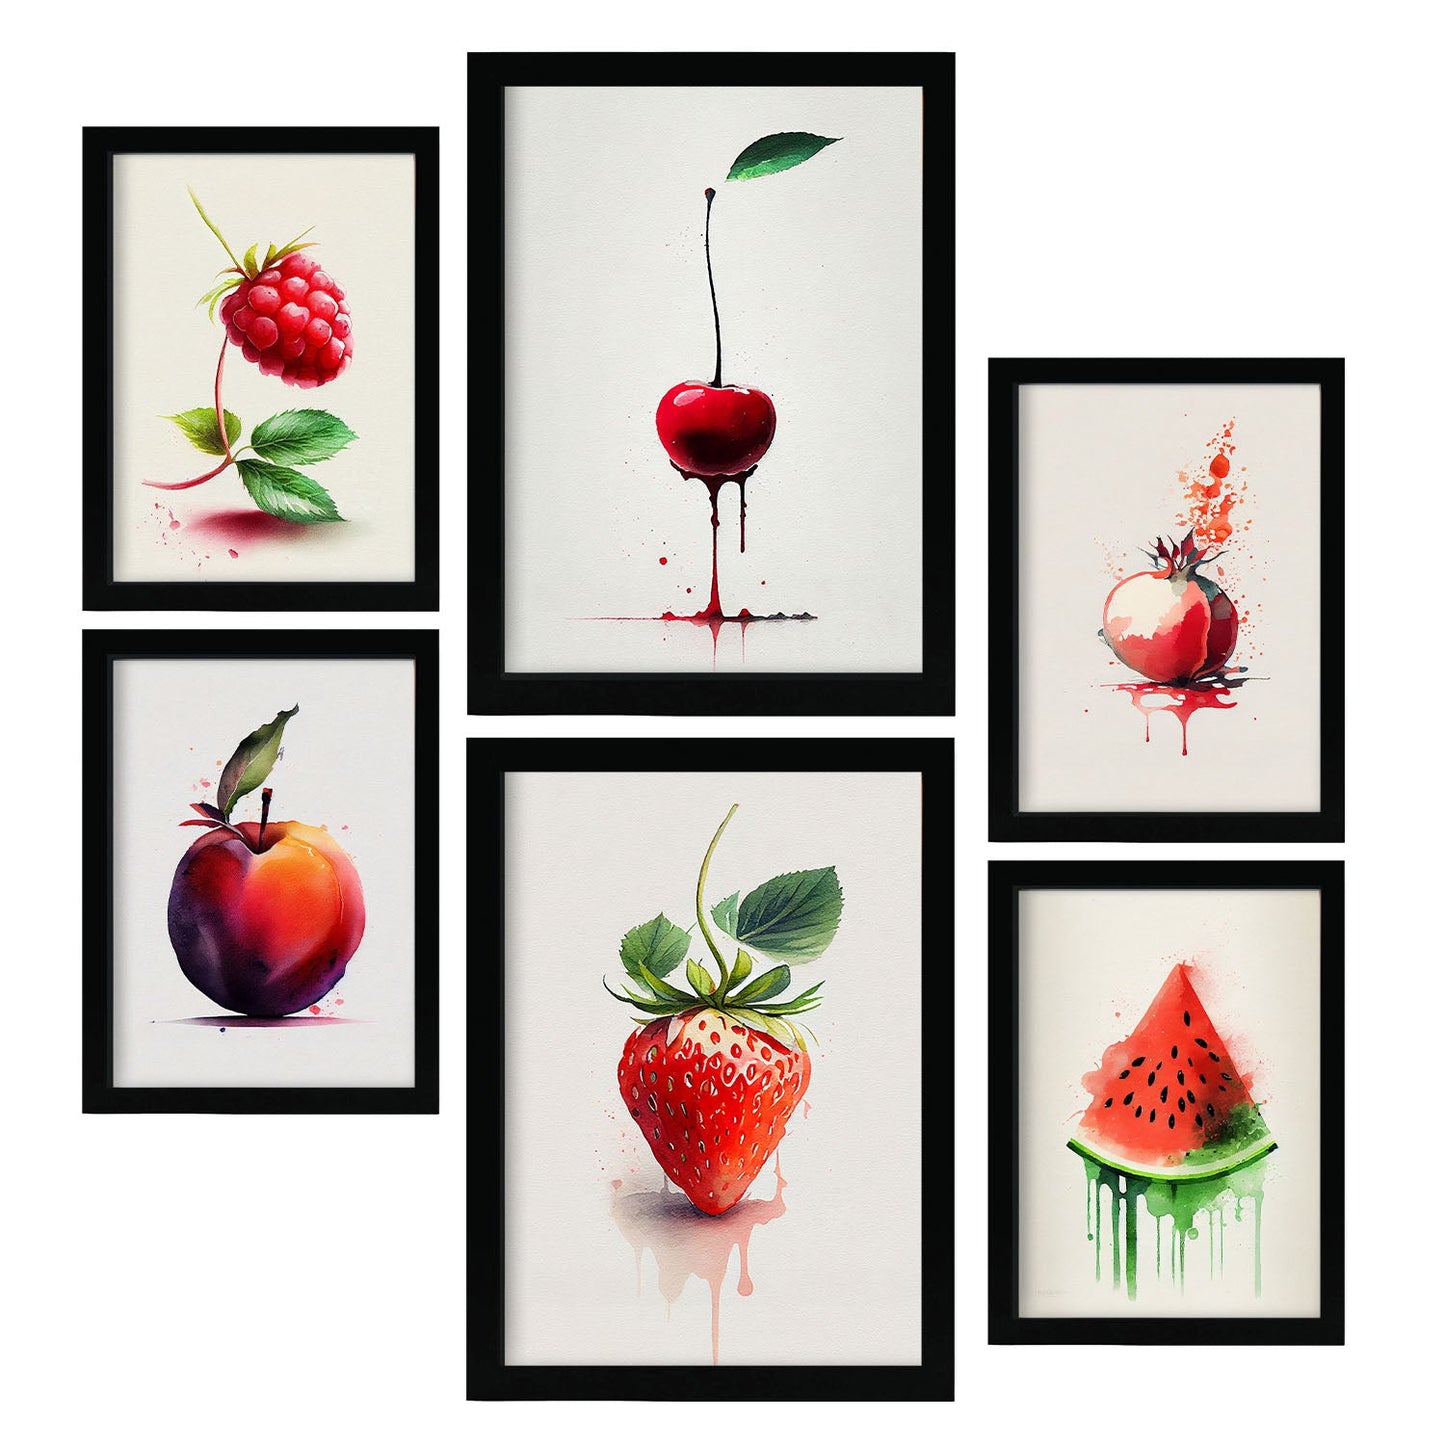 Nacnic Watercolor Fruits Set_02. Aesthetic Wall Art Prints for Bedroom or Living Room Design.